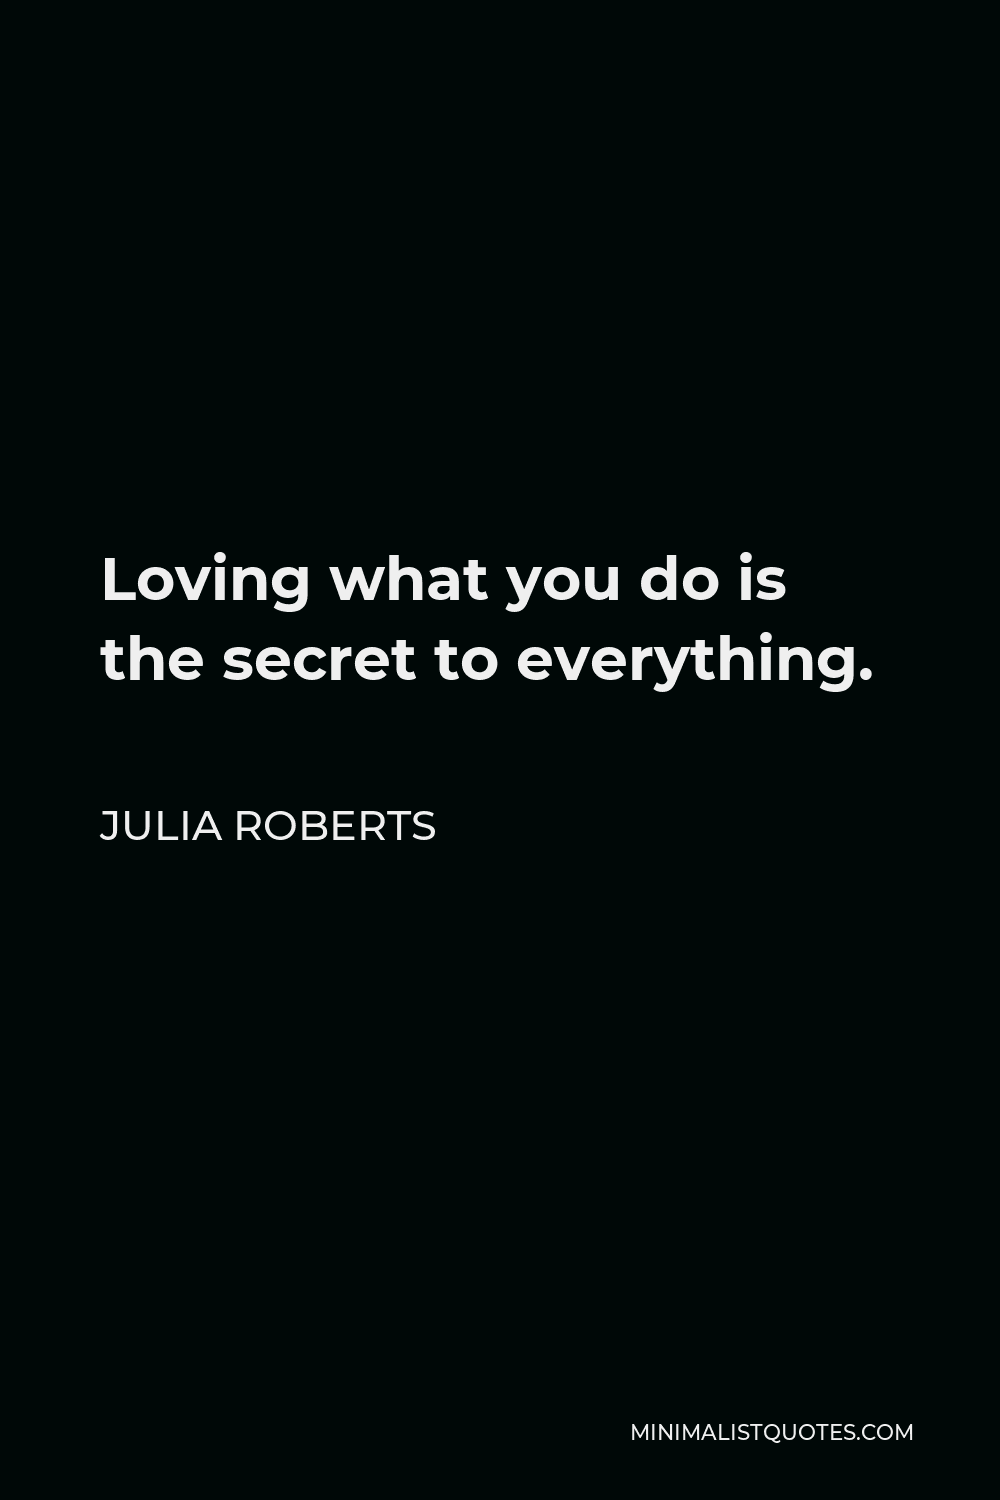 Julia Roberts Quote - Loving what you do is the secret to everything.